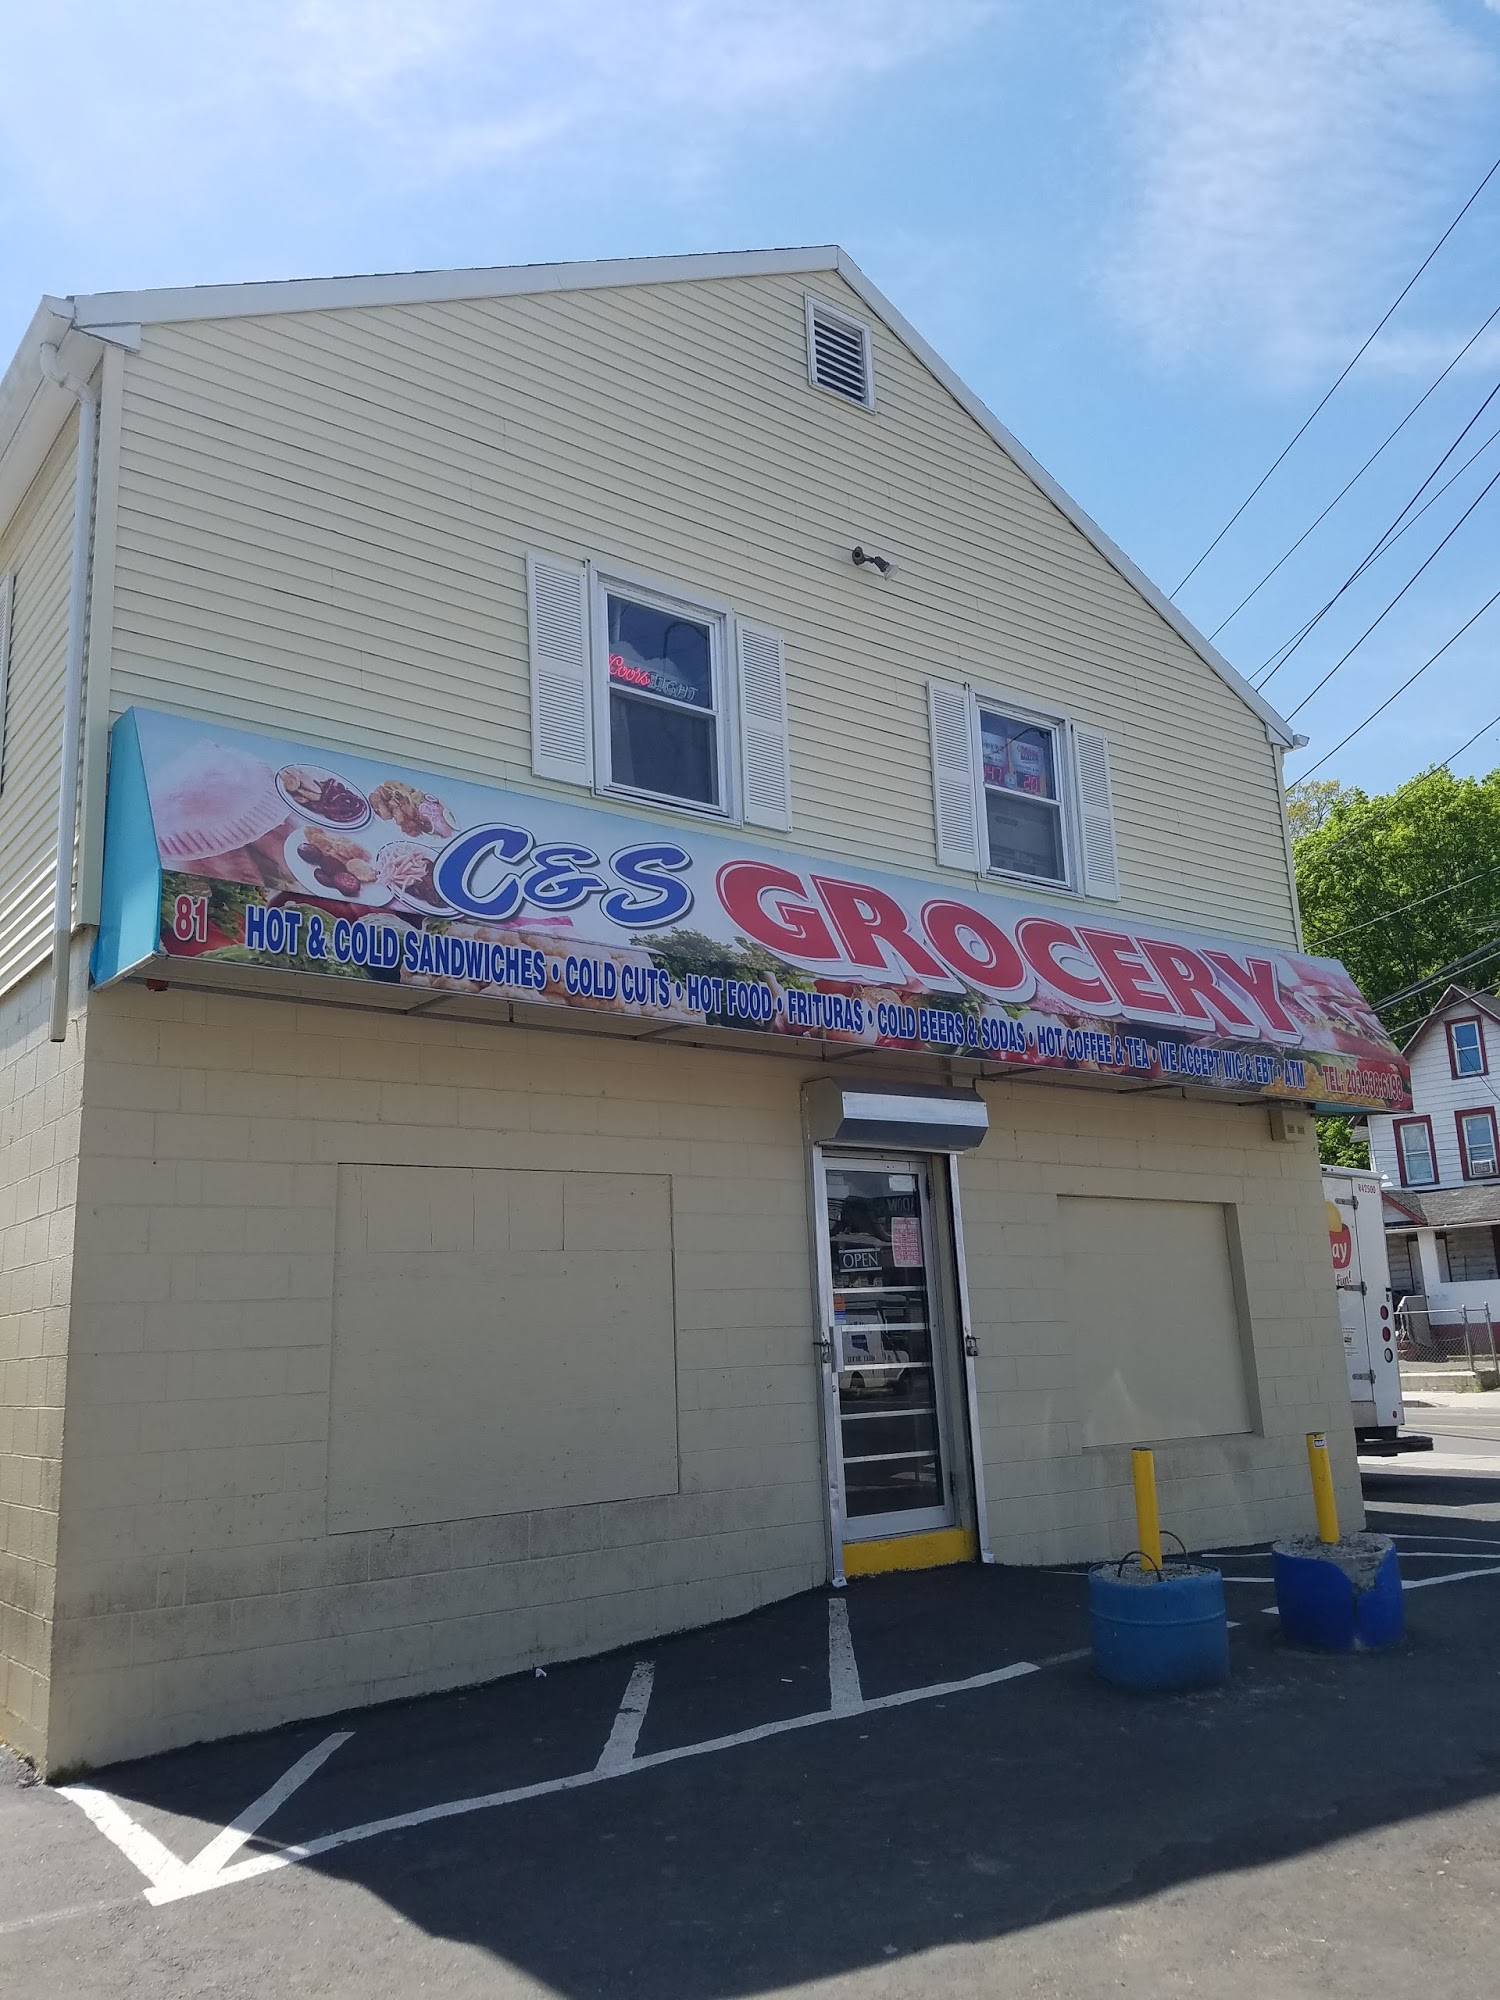 C & S Grocery